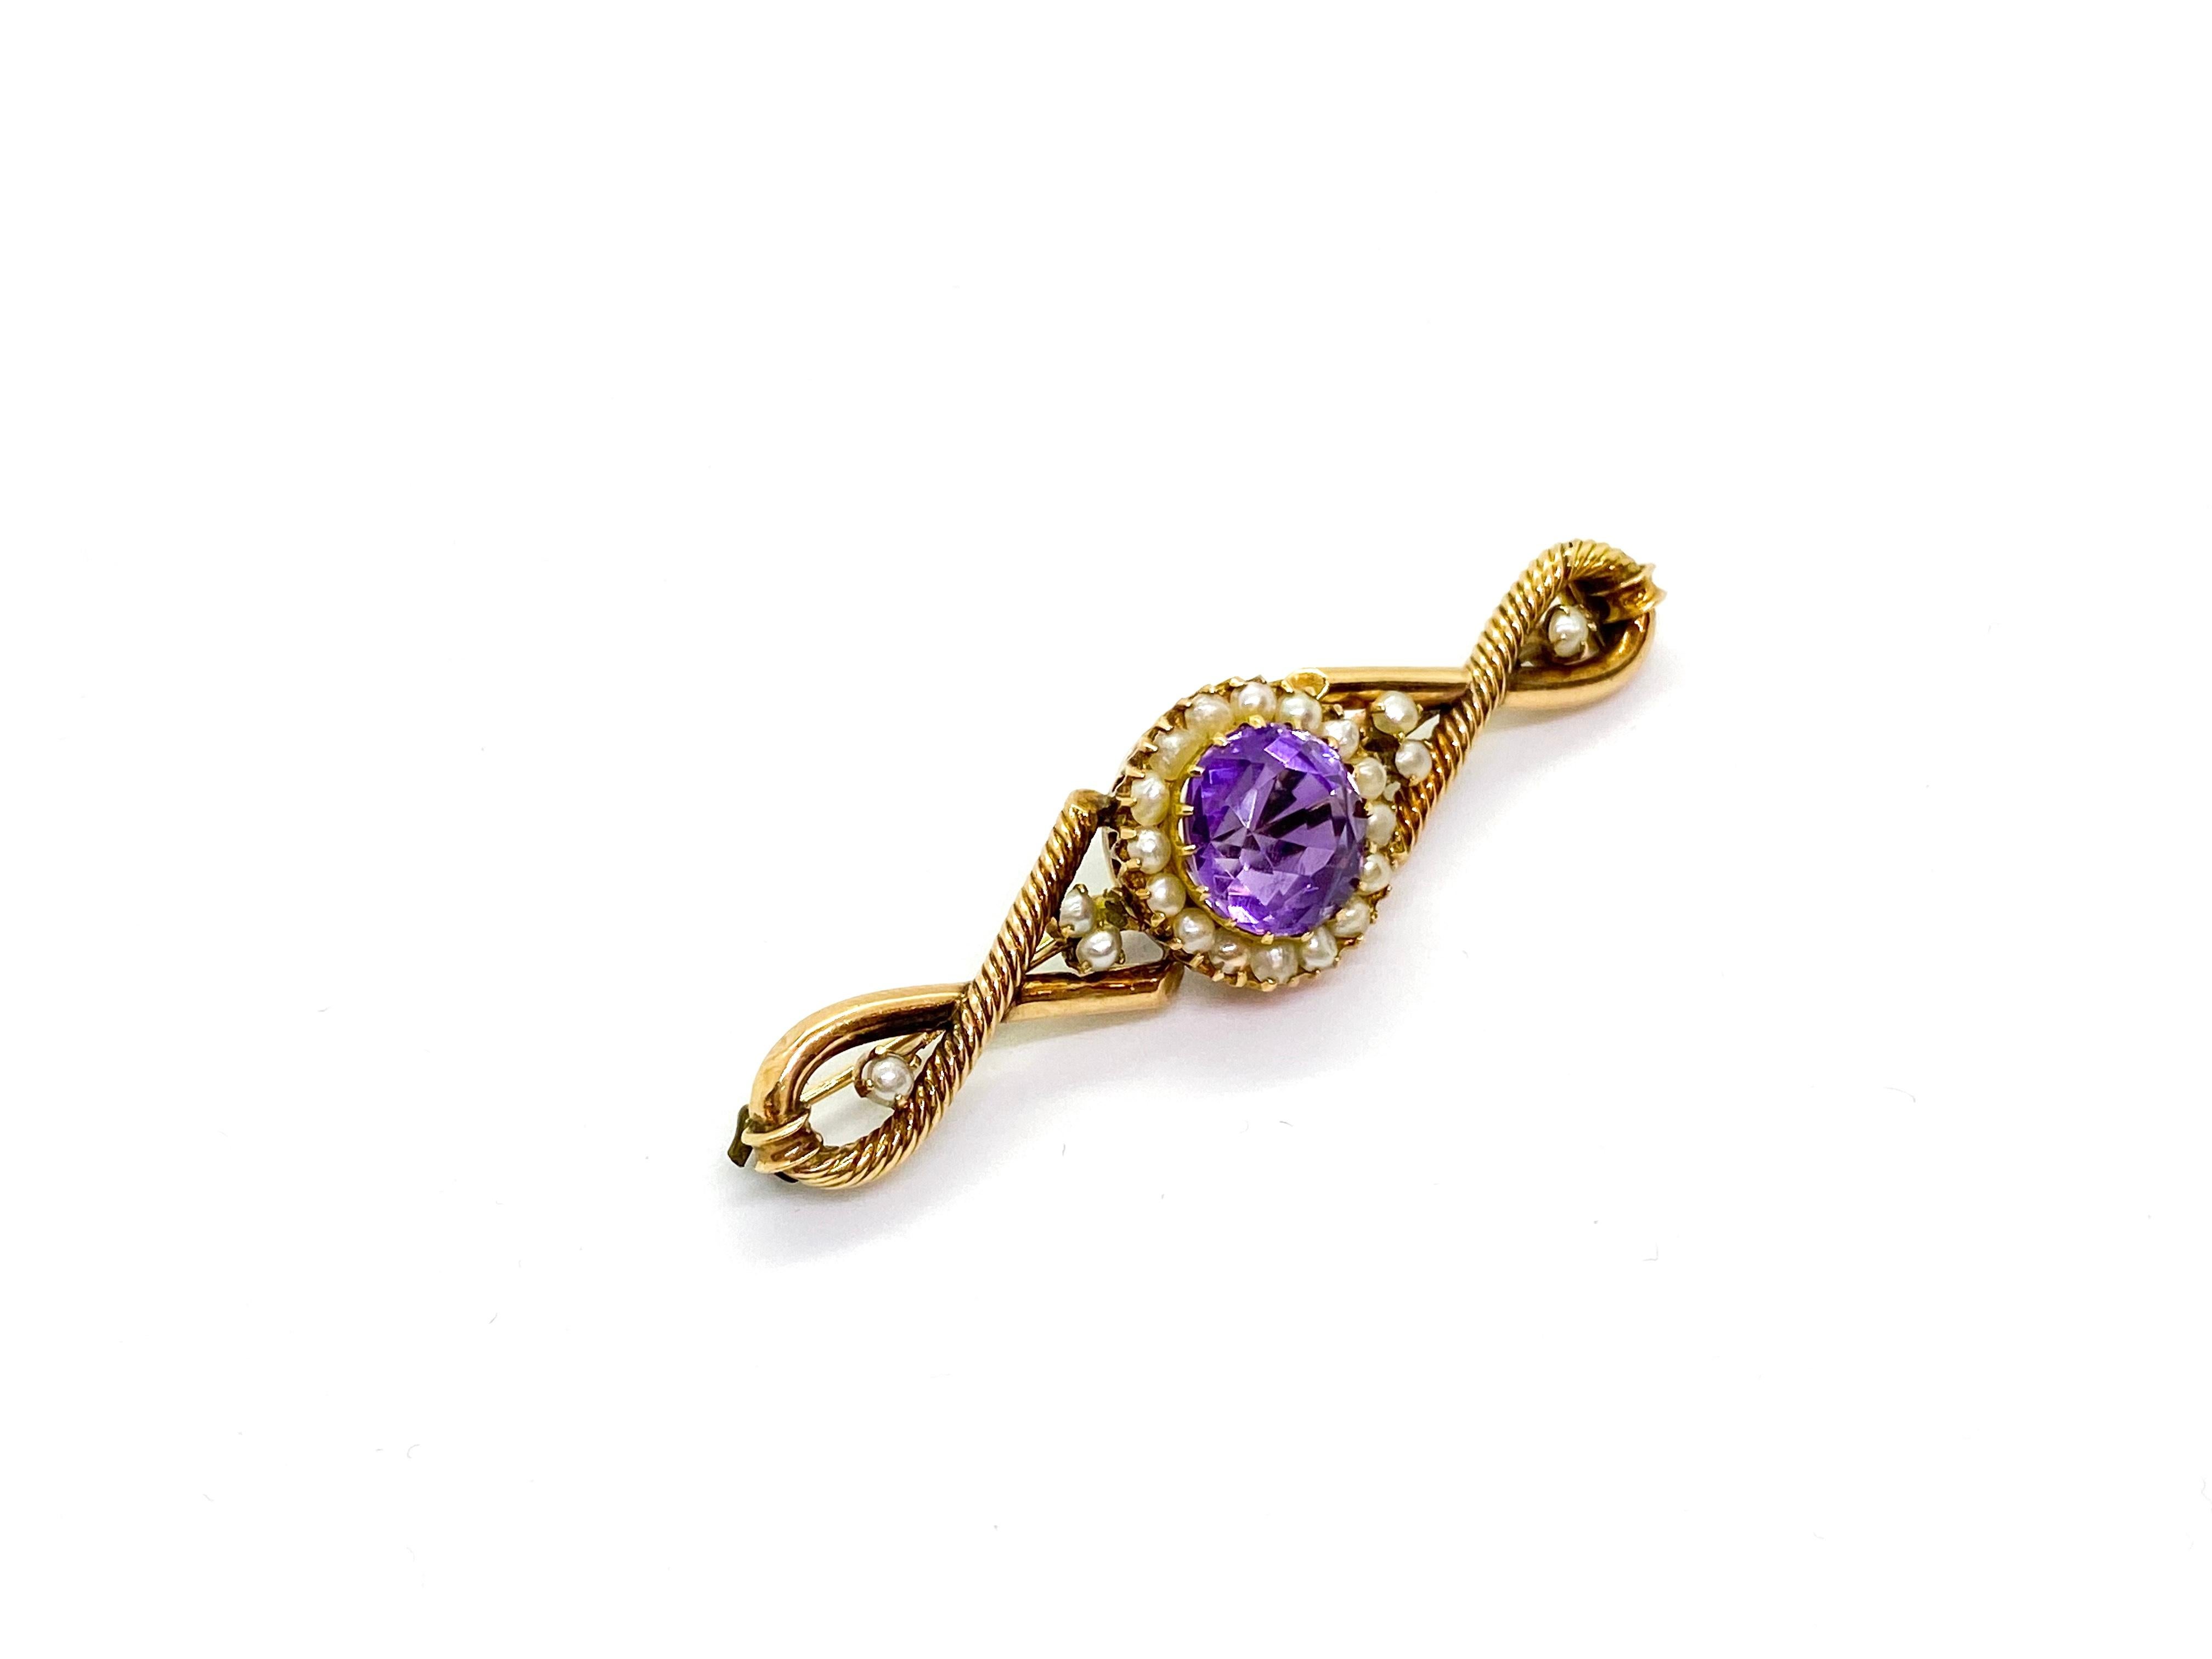 14 Carat Yellow Gold Amethyst Pearls Russia Brooch For Sale 2